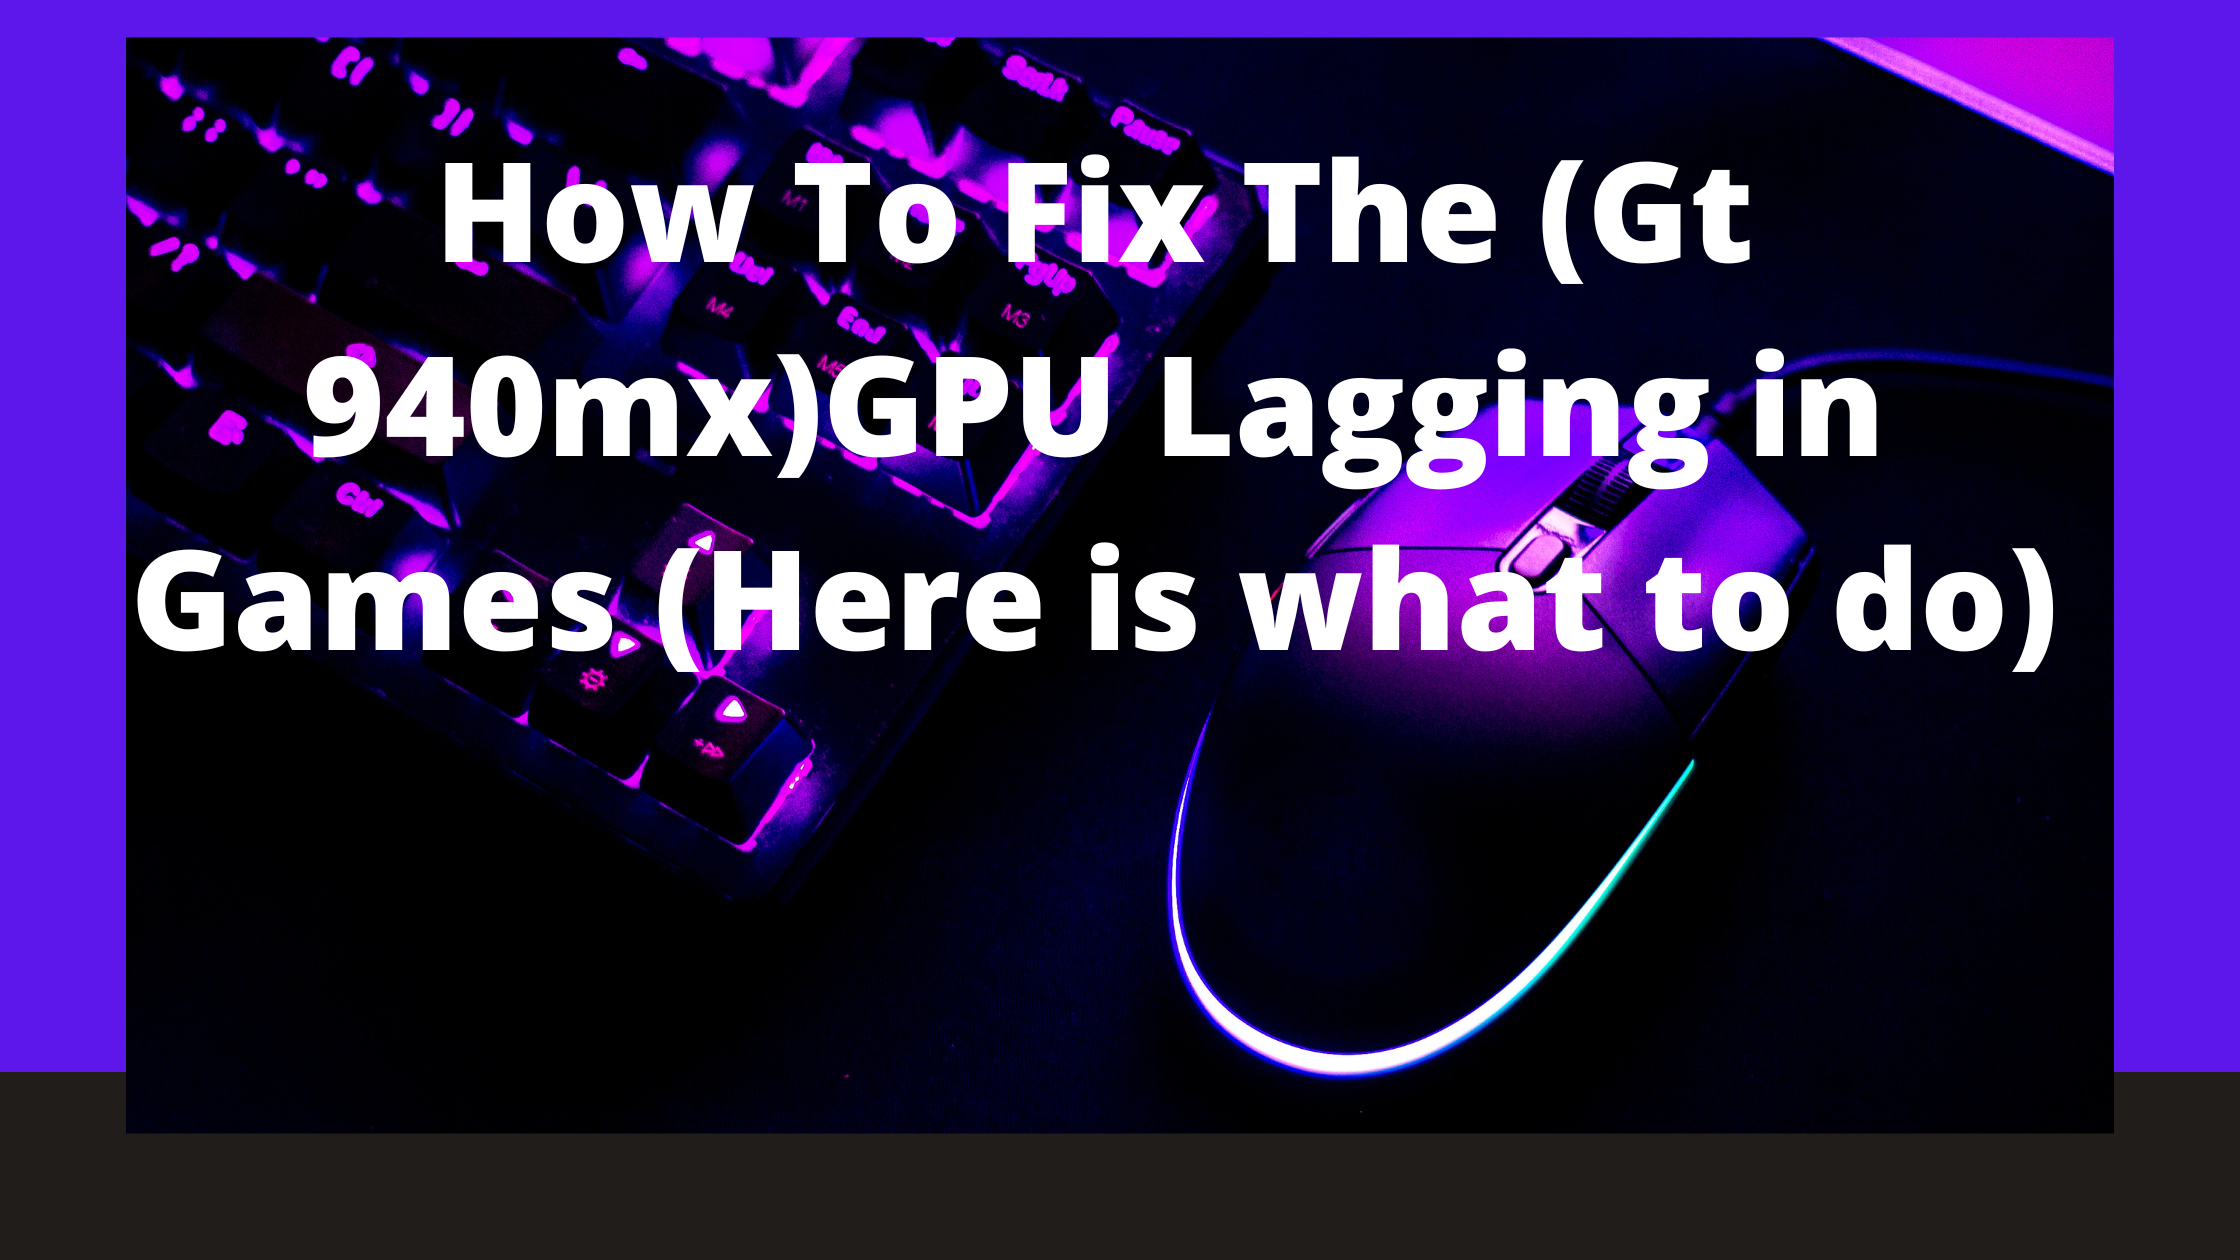 How To Fix The (Gt 940mx)GPU Lagging in Games (Here is what to do)